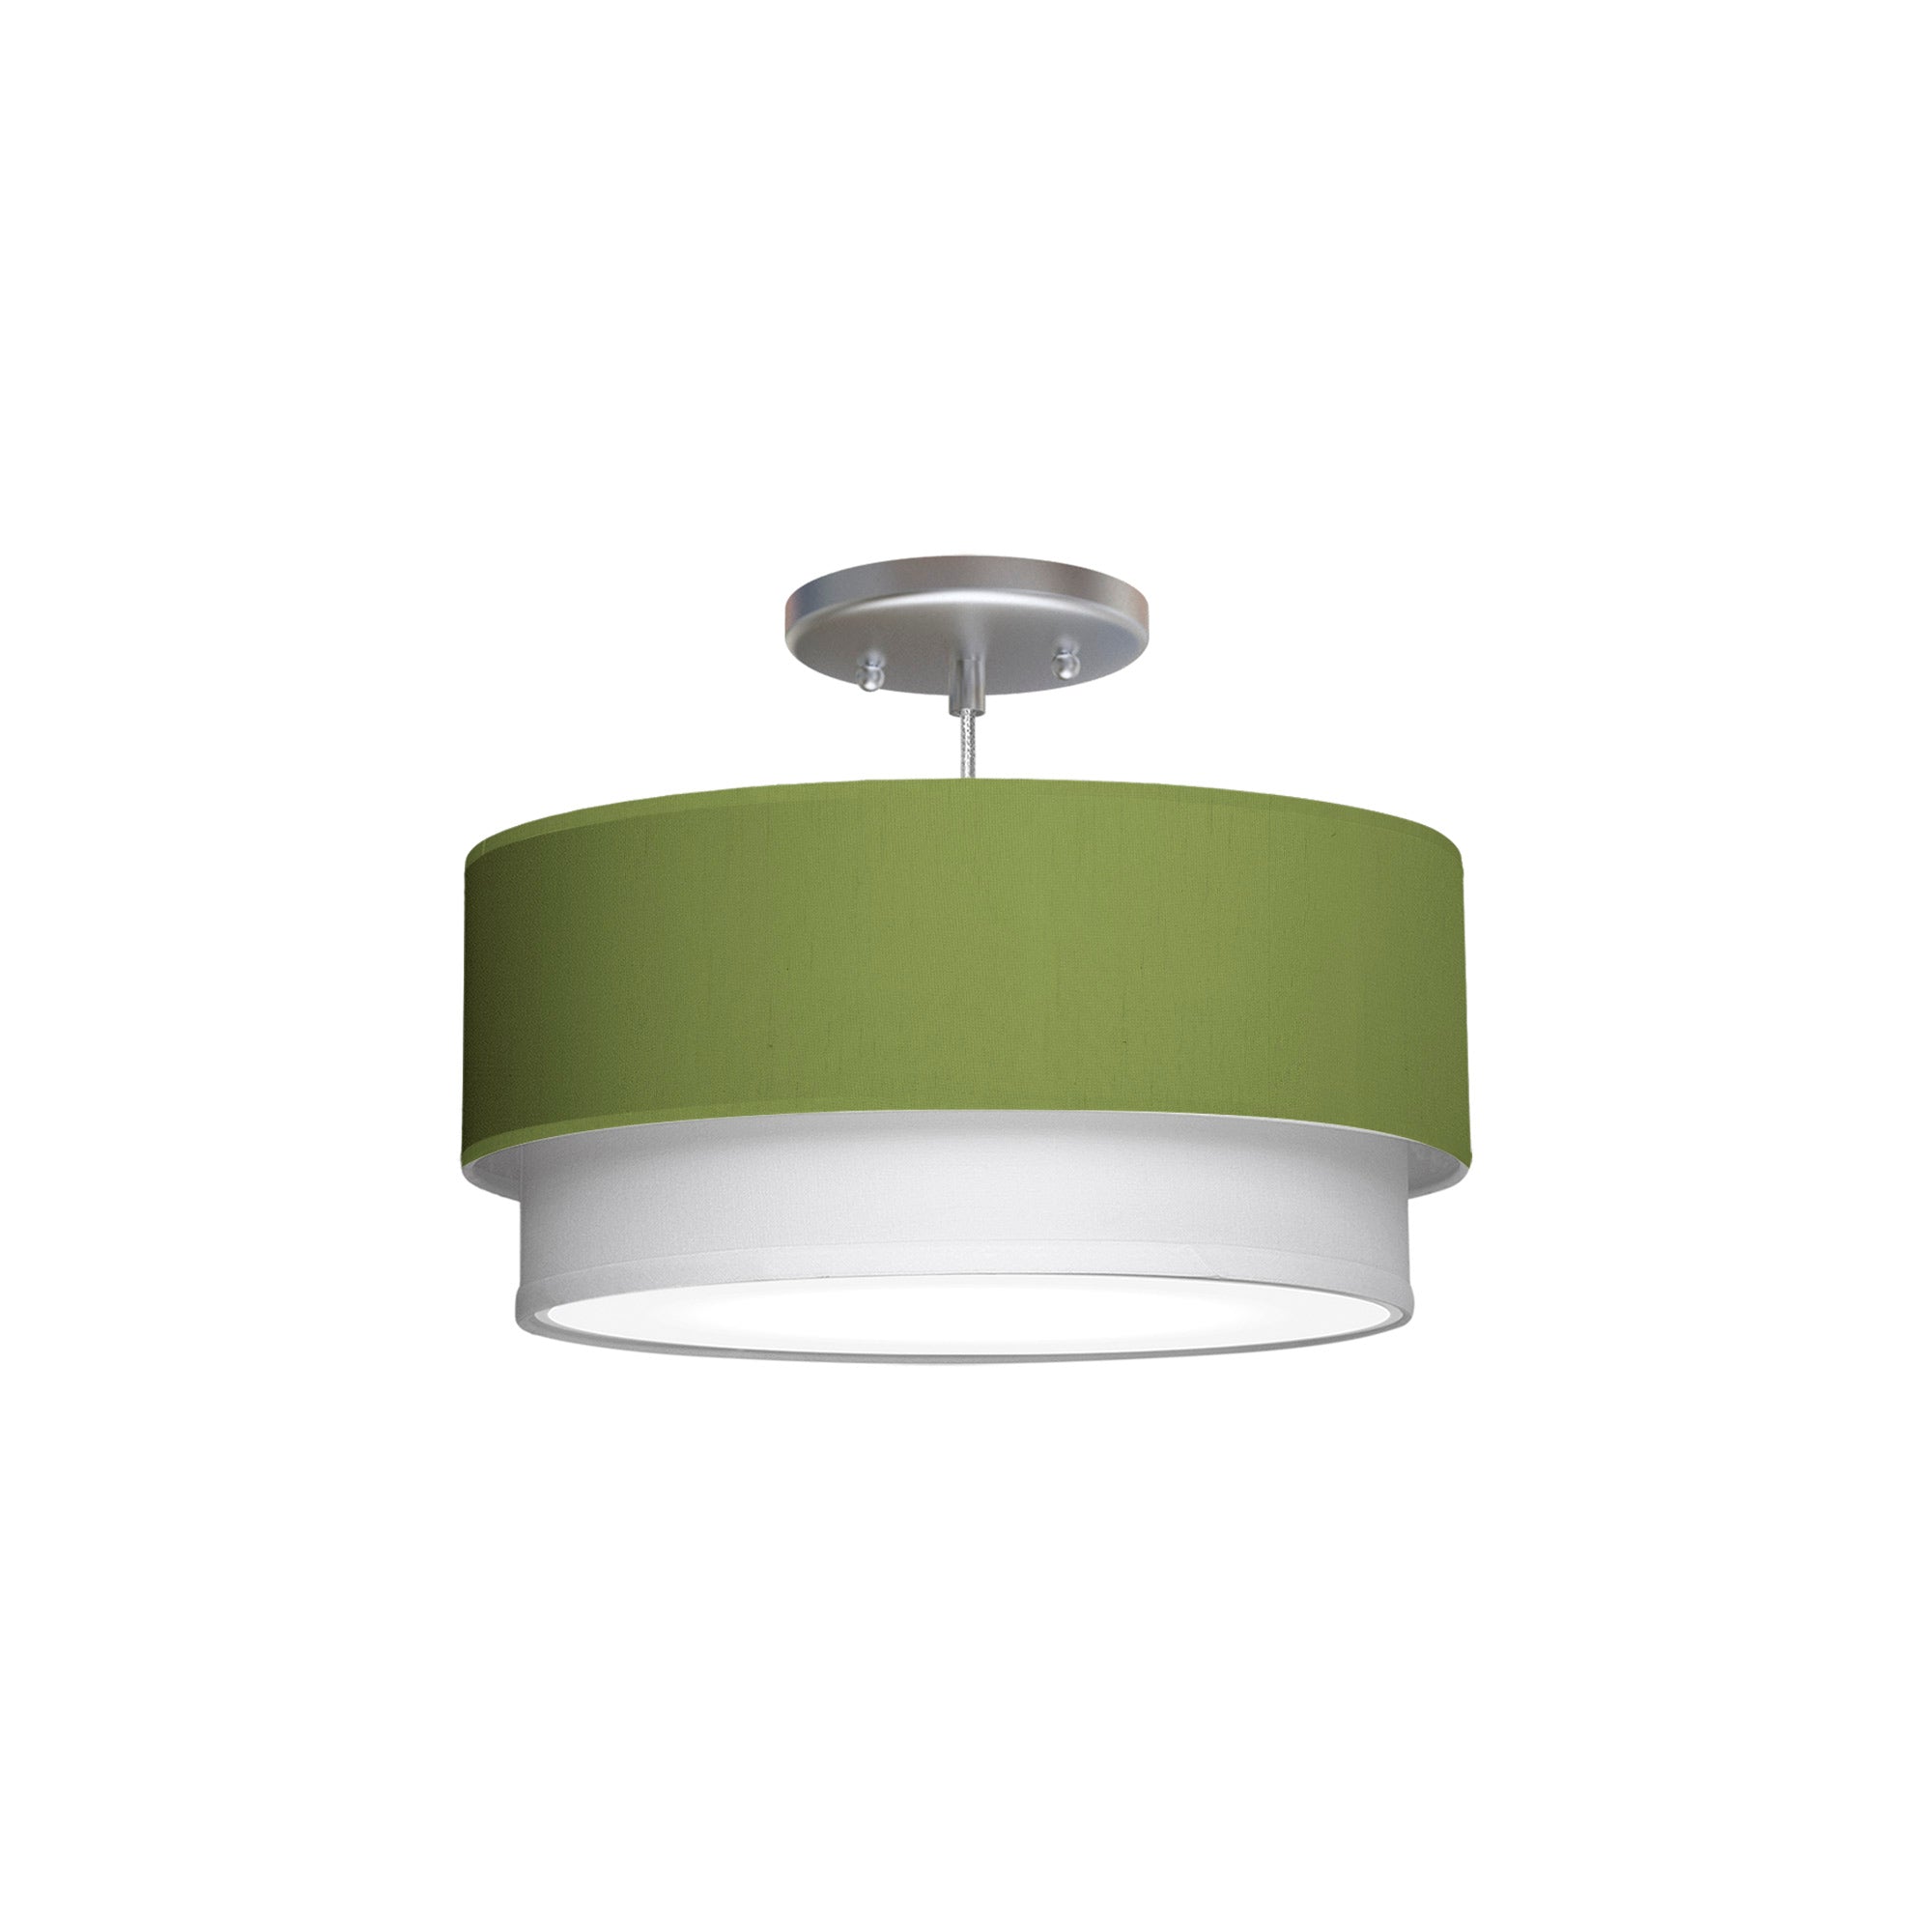 The Lenny Hanging Lamp from Seascape Fixtures with a silk shade in verde color.